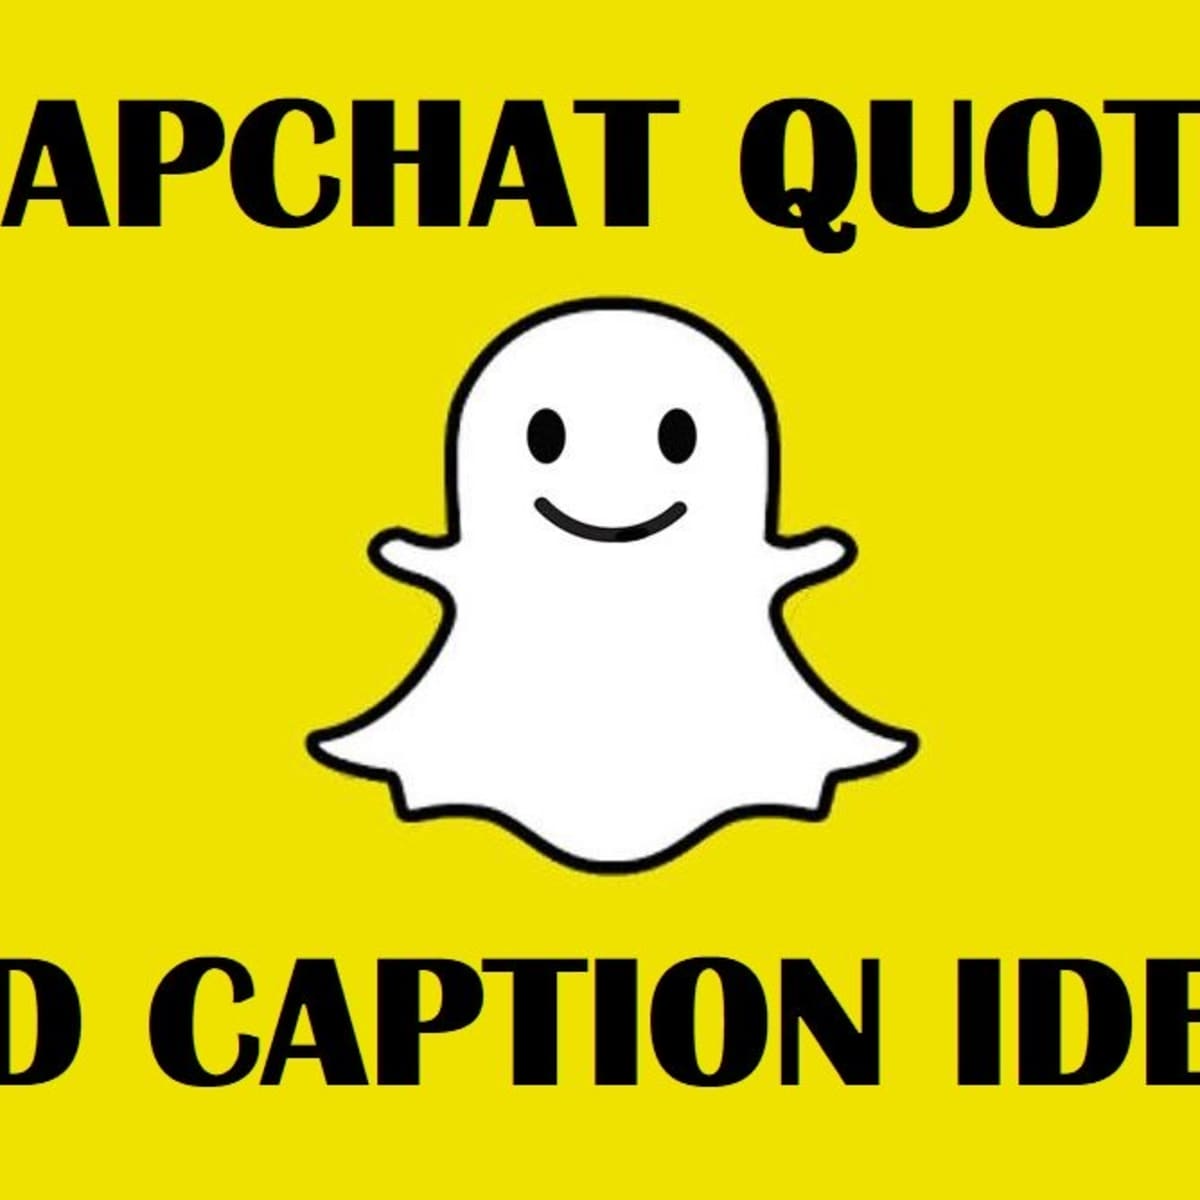 alex ciccarelli recommends cute snapchat captions pic